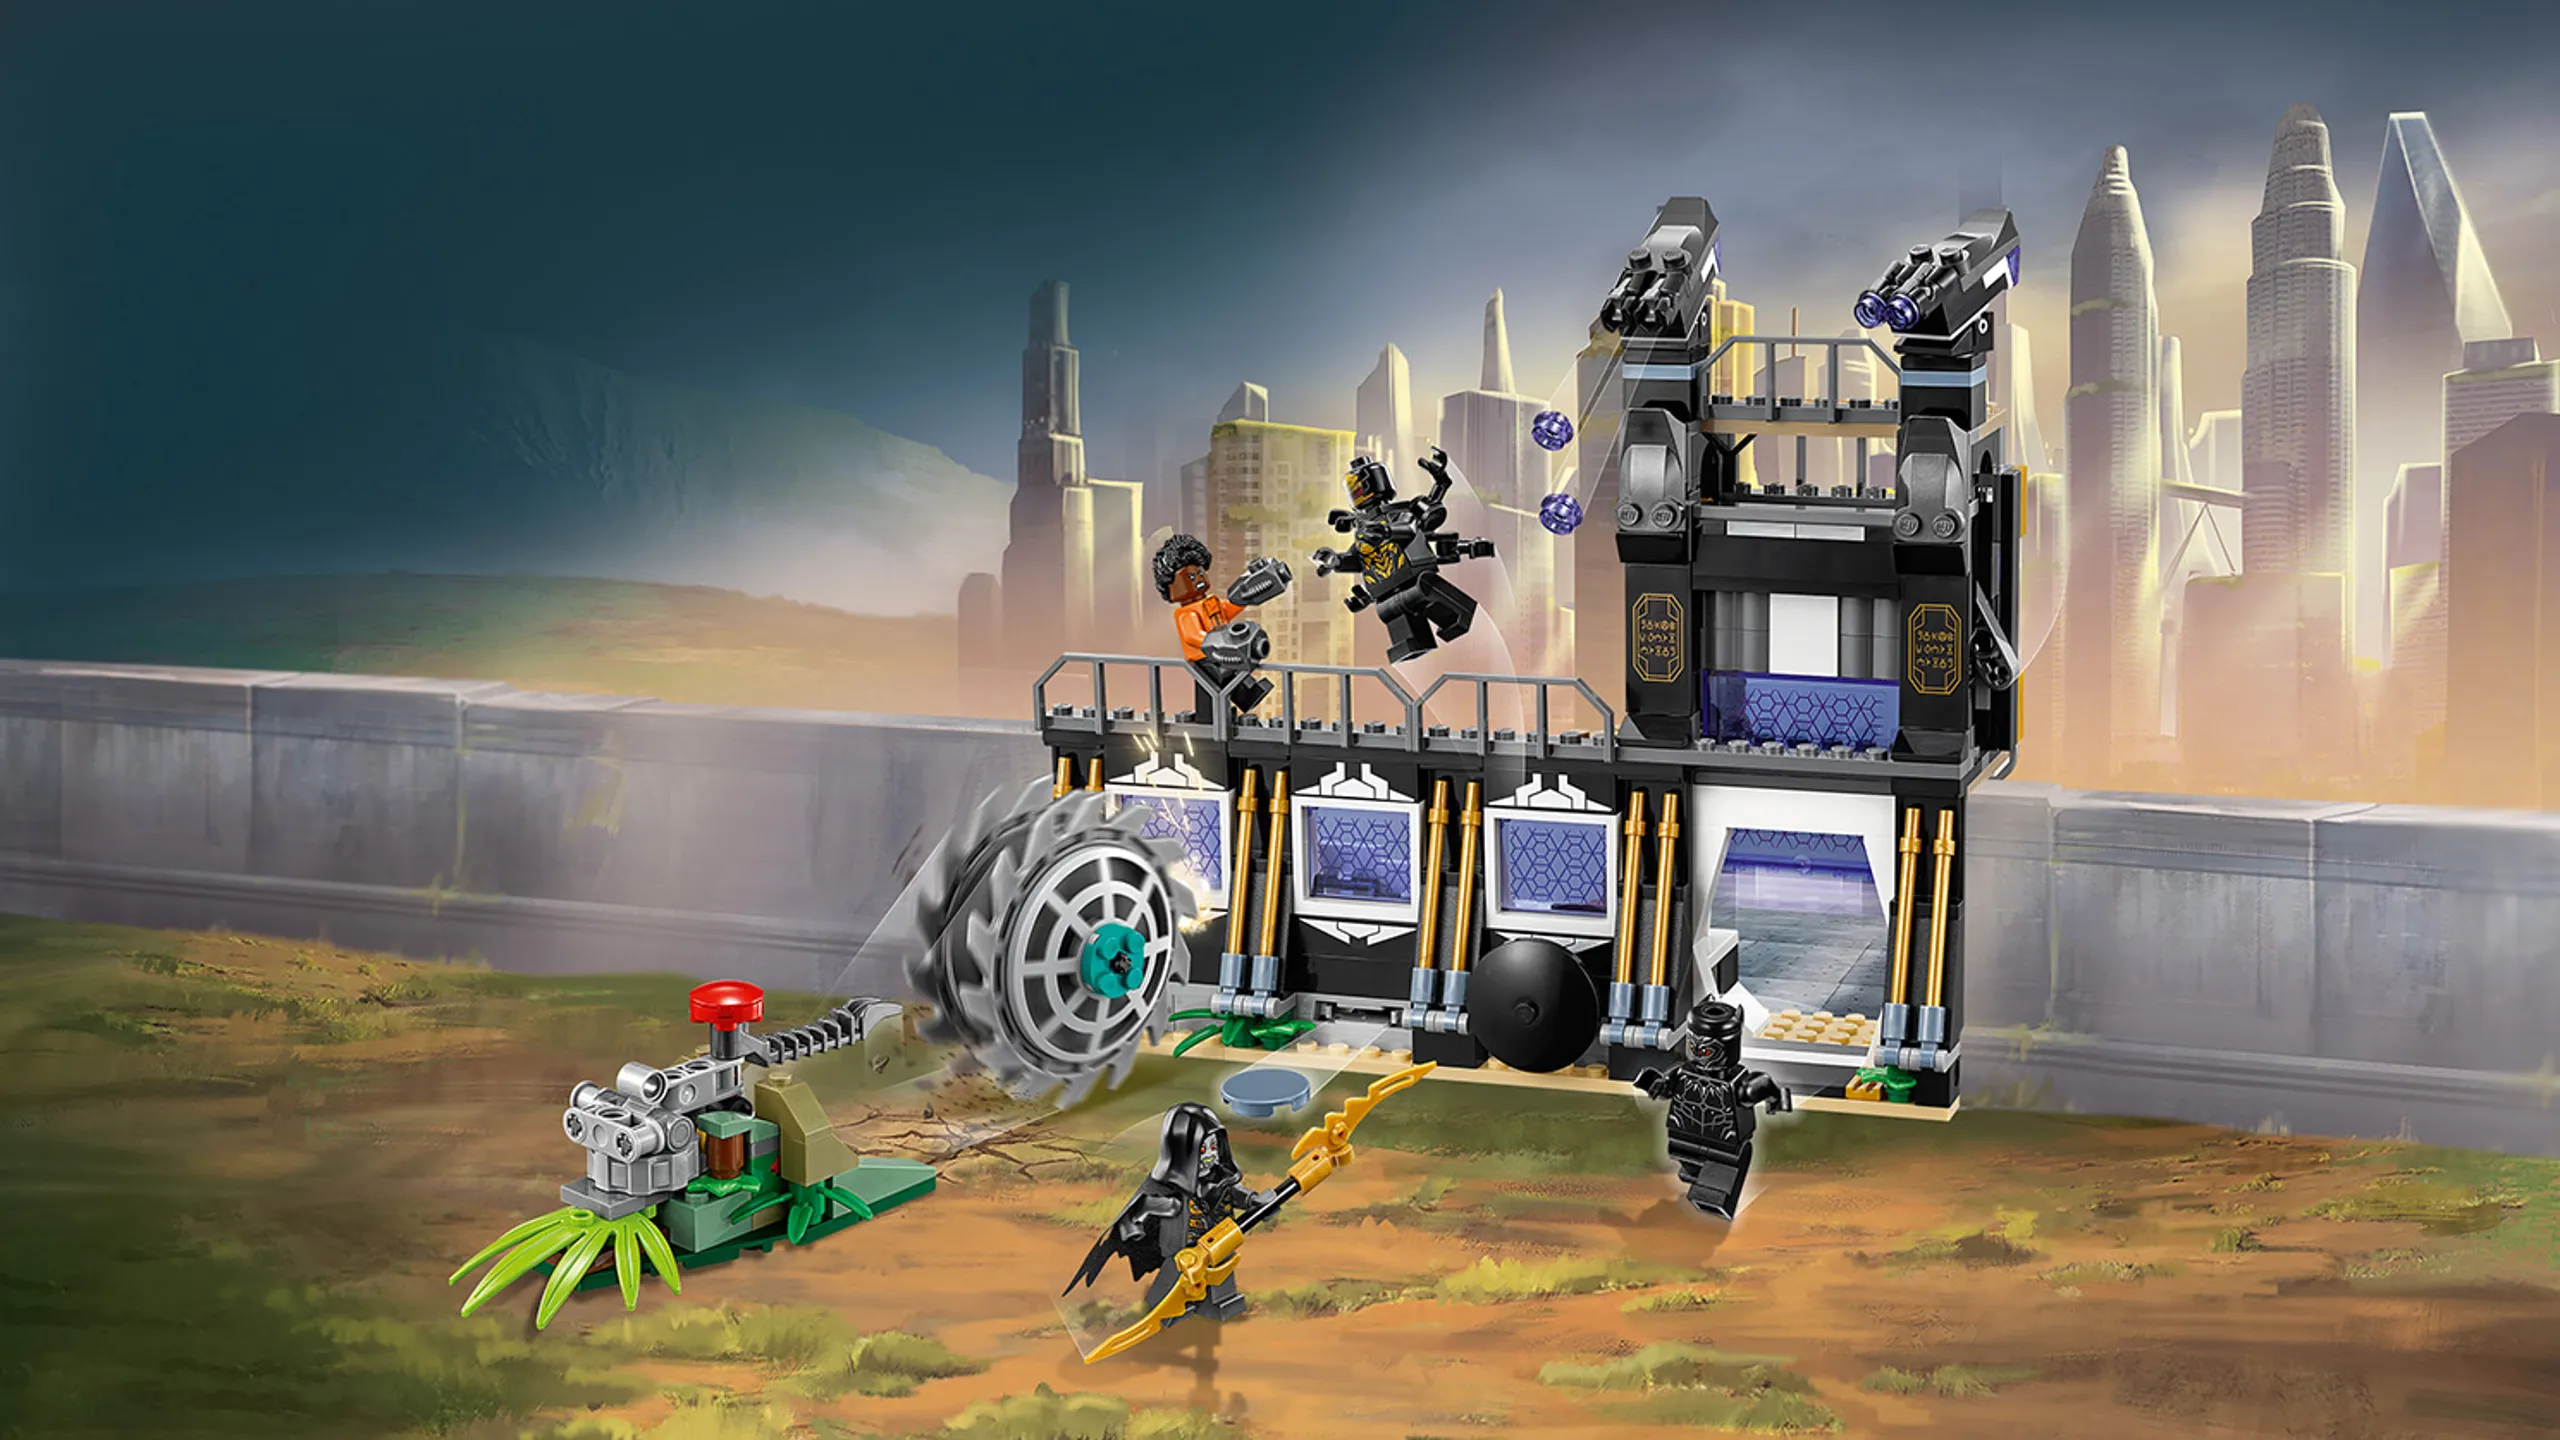 LEGO Super Heroes - 76103 Corvus Glaive Thresher Attack - Fire the Wakandan wall’s dual stud-shooting turrets and hidden disc shooter at the Thresher.